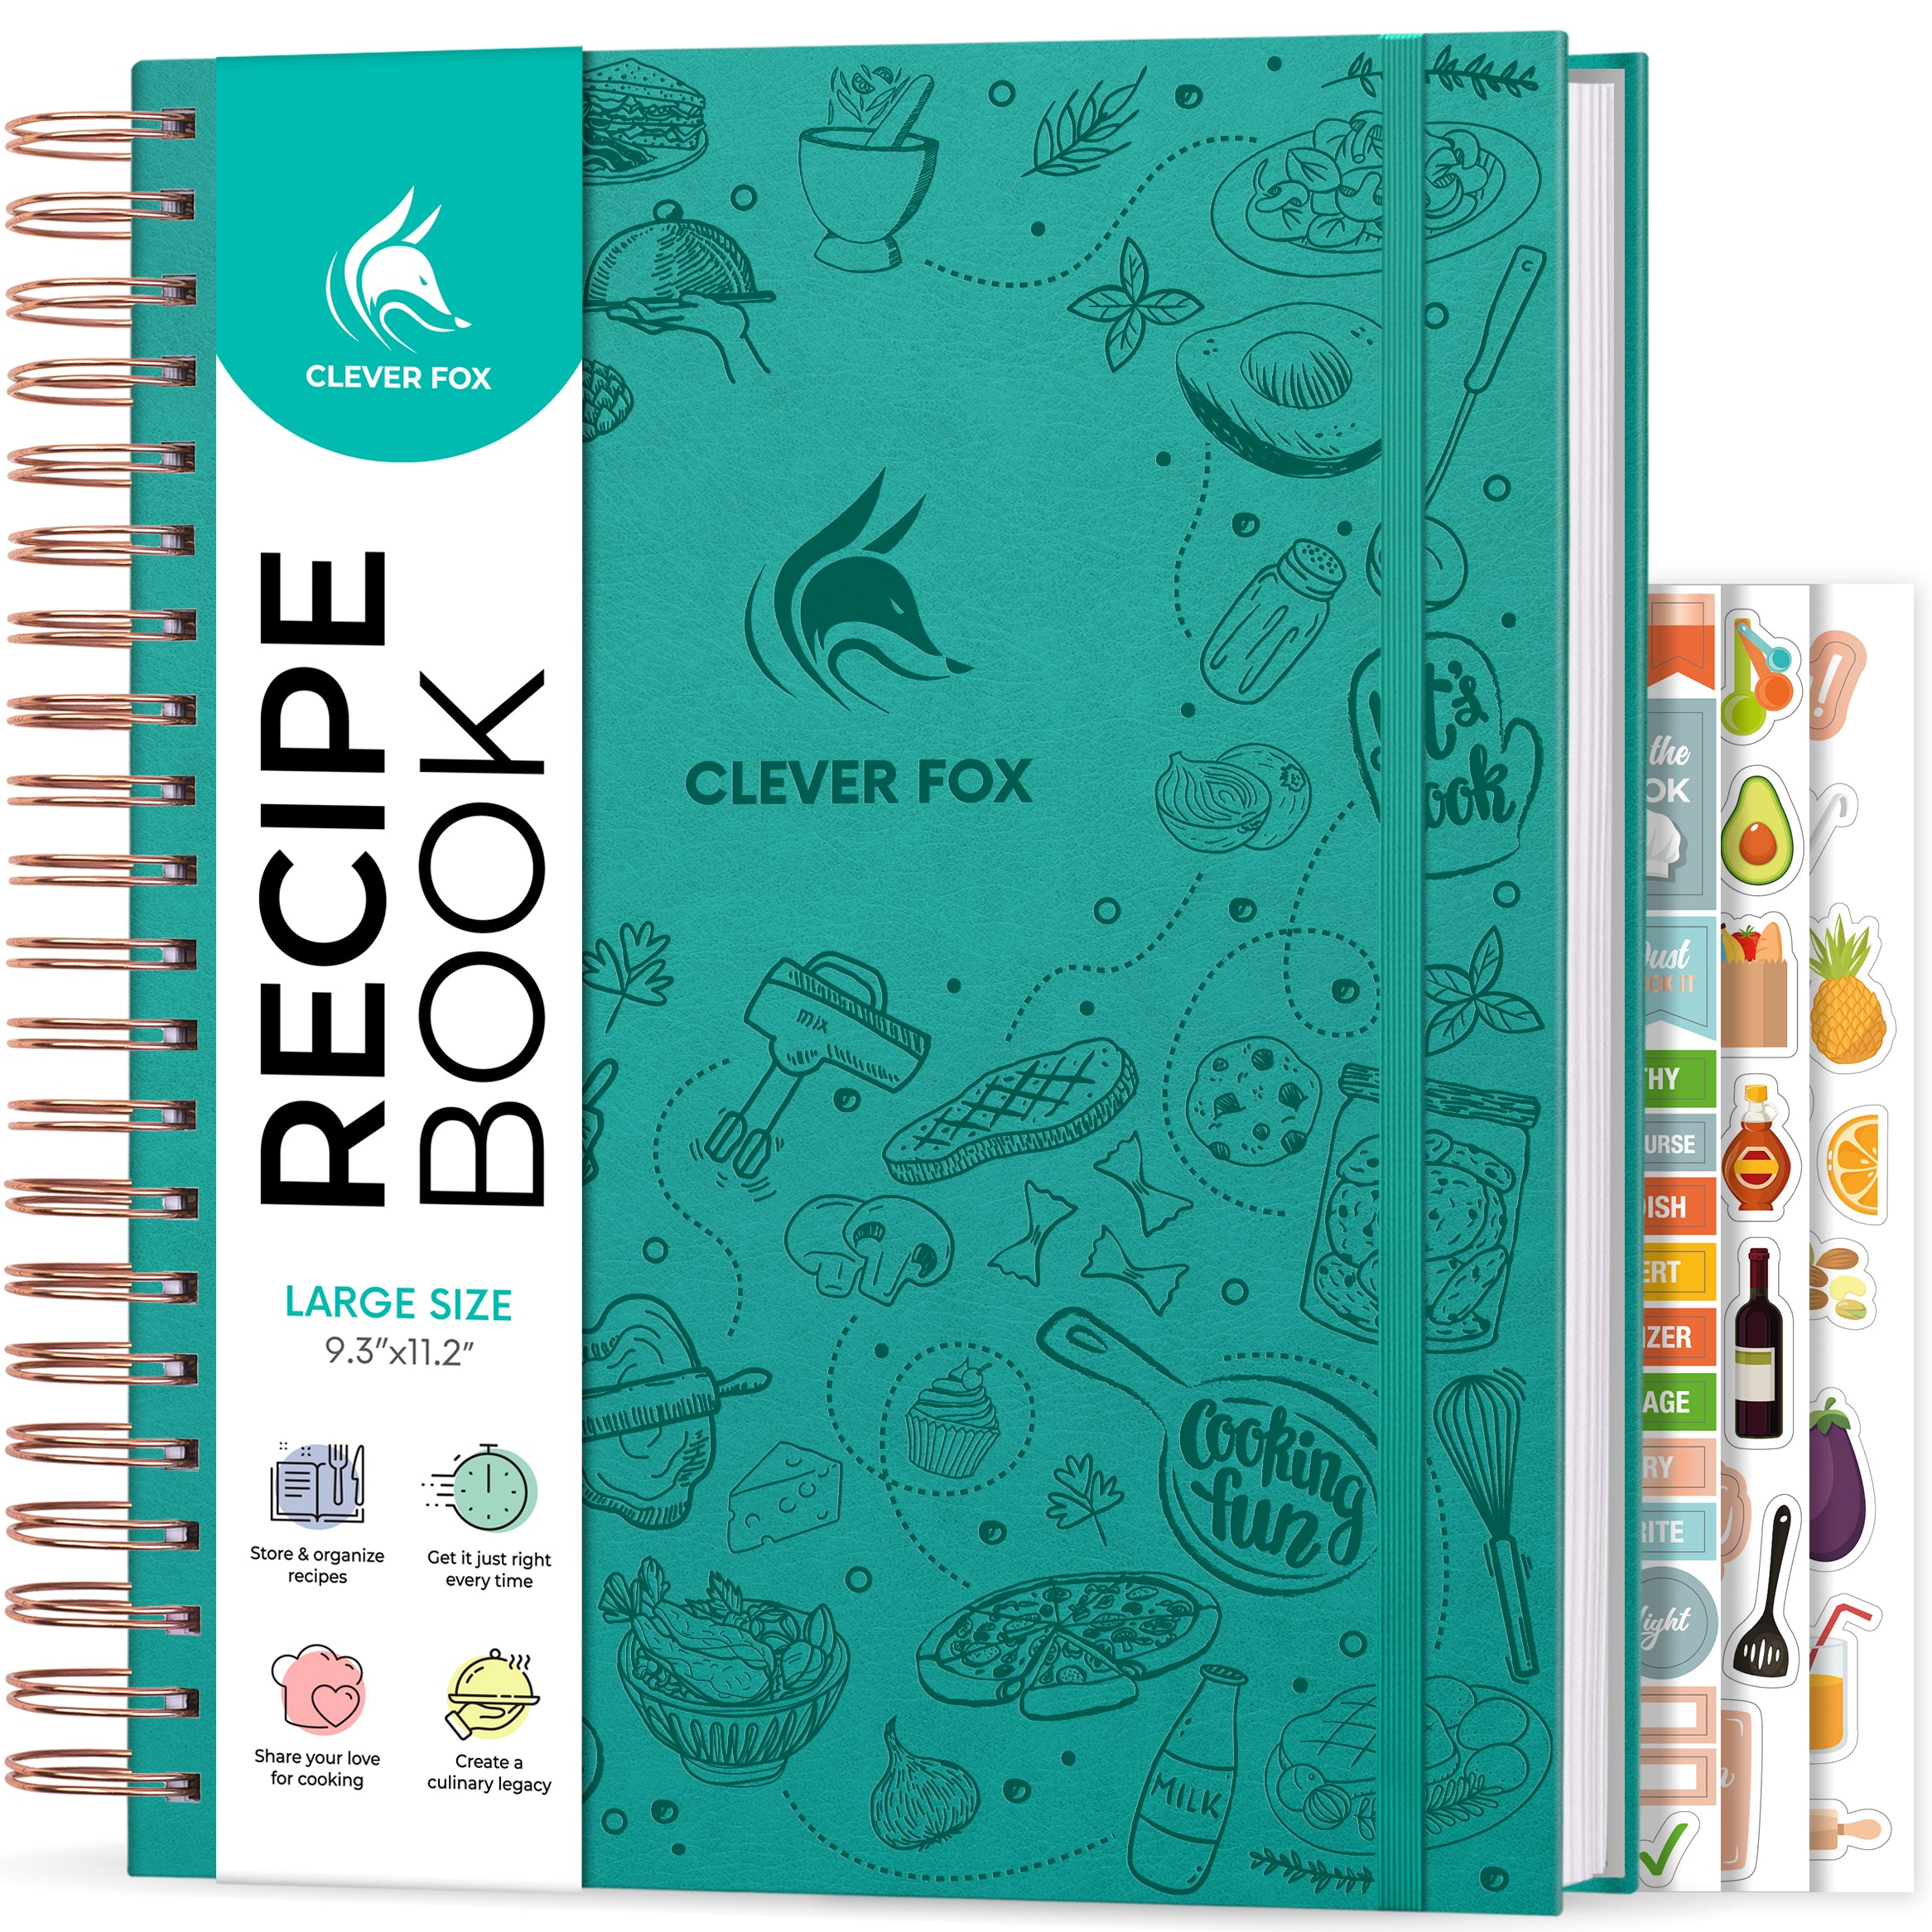 Clever Fox Recipe Book, Size: One size, Pink